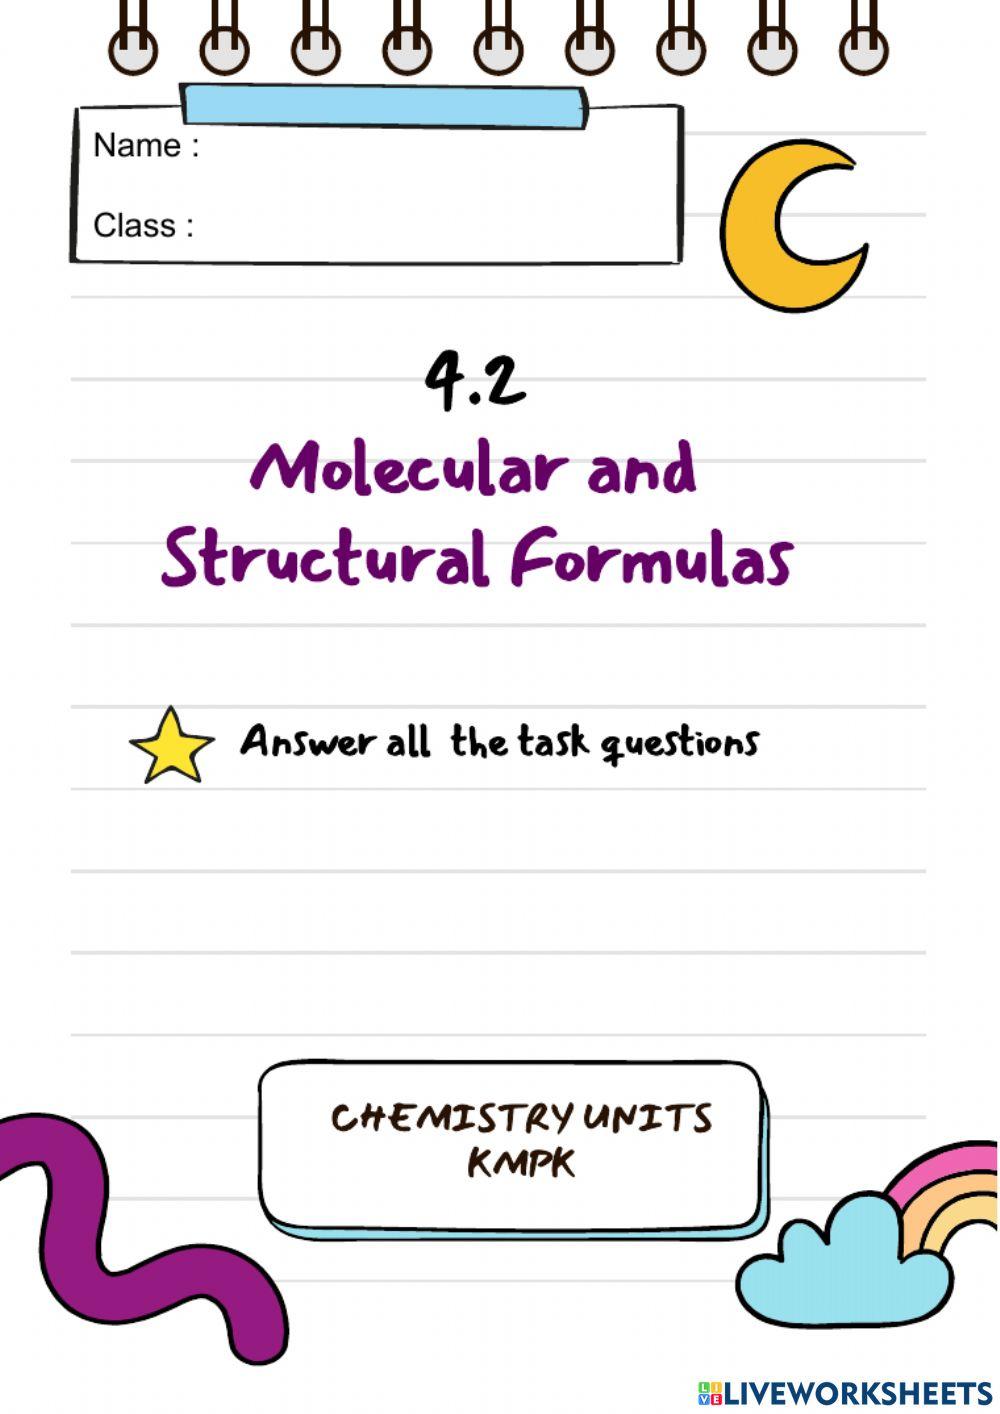 Molecular and structure formula